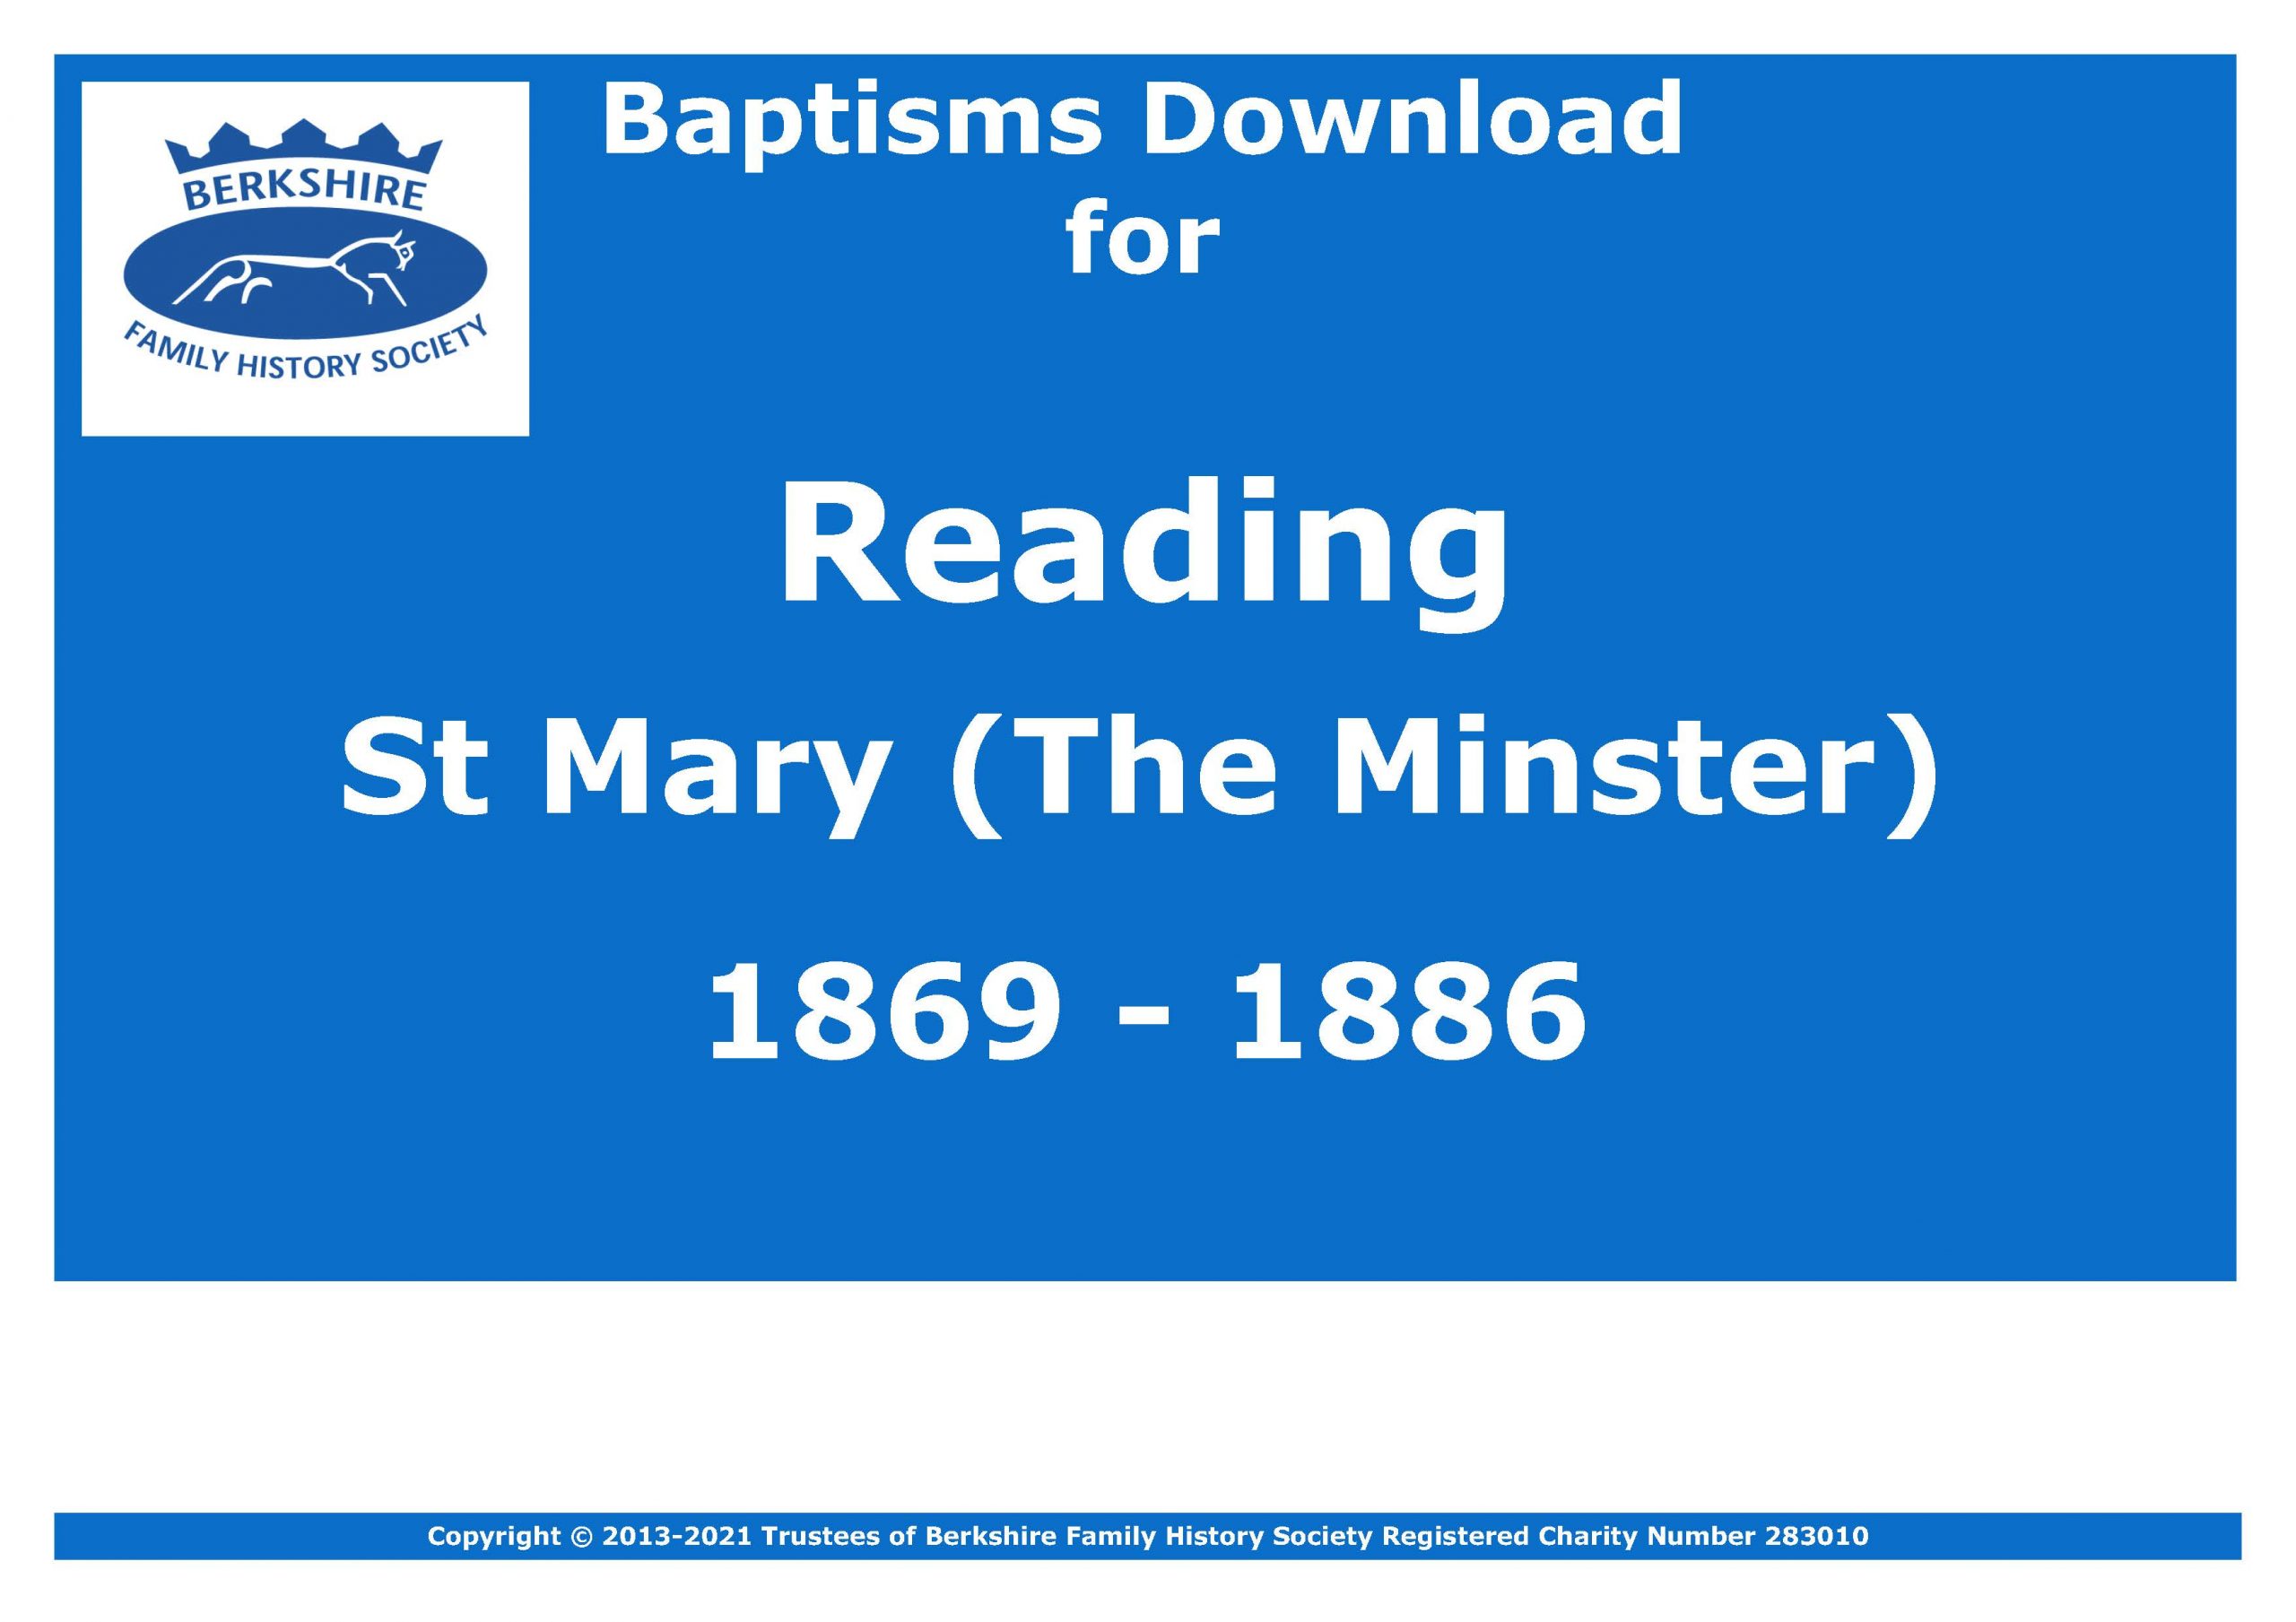 Reading St Mary Minster Baptisms 1869-1886 (Download) D1741 (Part 3 of 5)